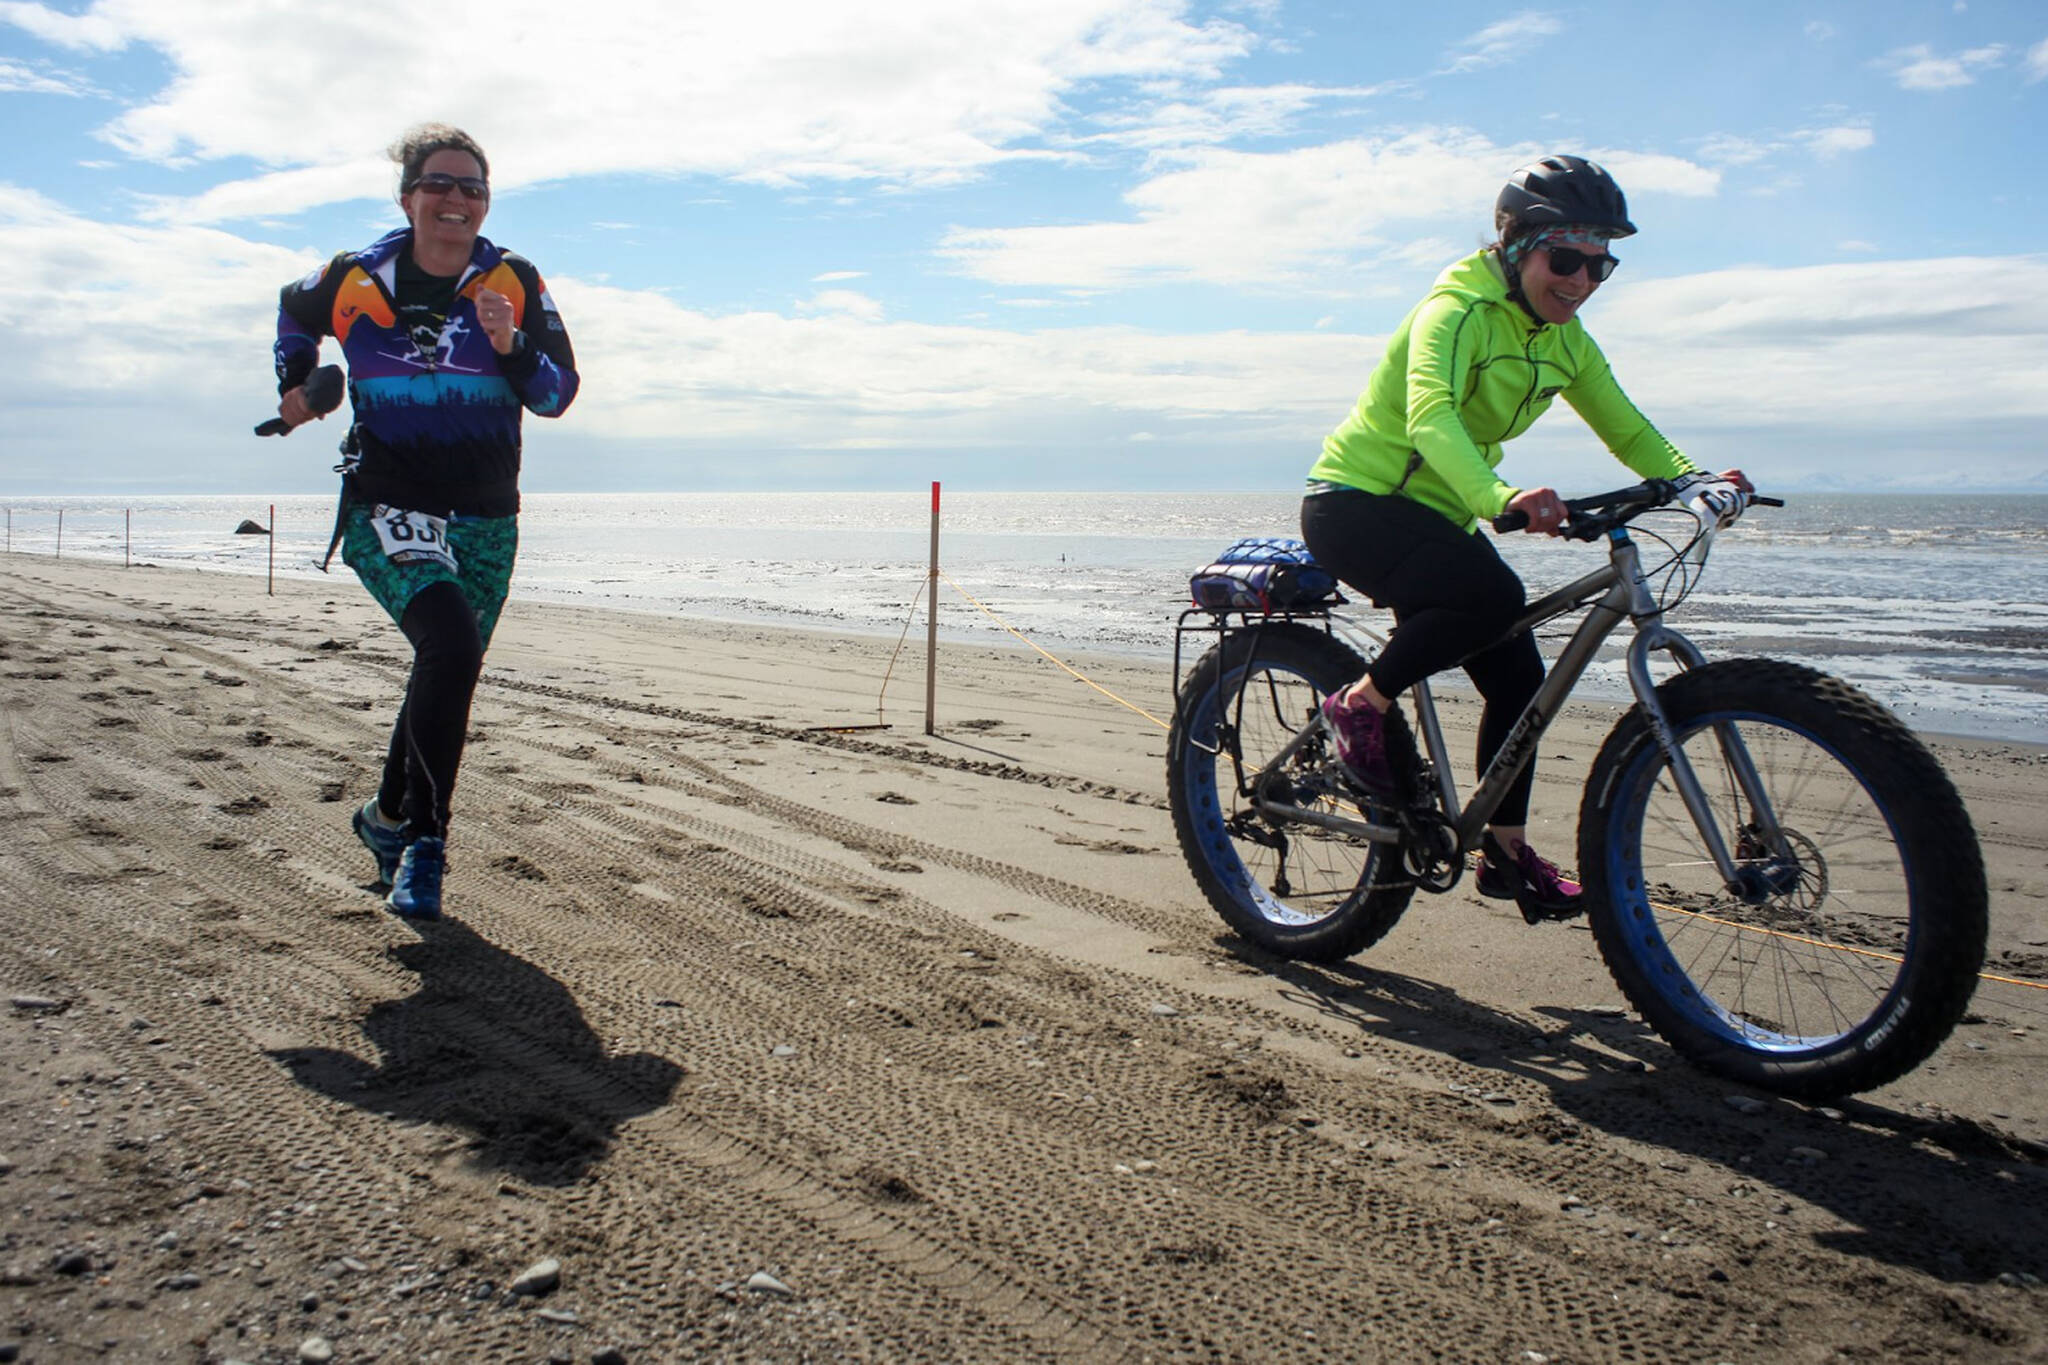 Heather Renner and Tasha Reynolds run and fat bike to the finish line on the Kenai Beach during the 2019 Mouth to Mouth Wild Run & Ride. (Photo courtesy Kaitlin Vadla)